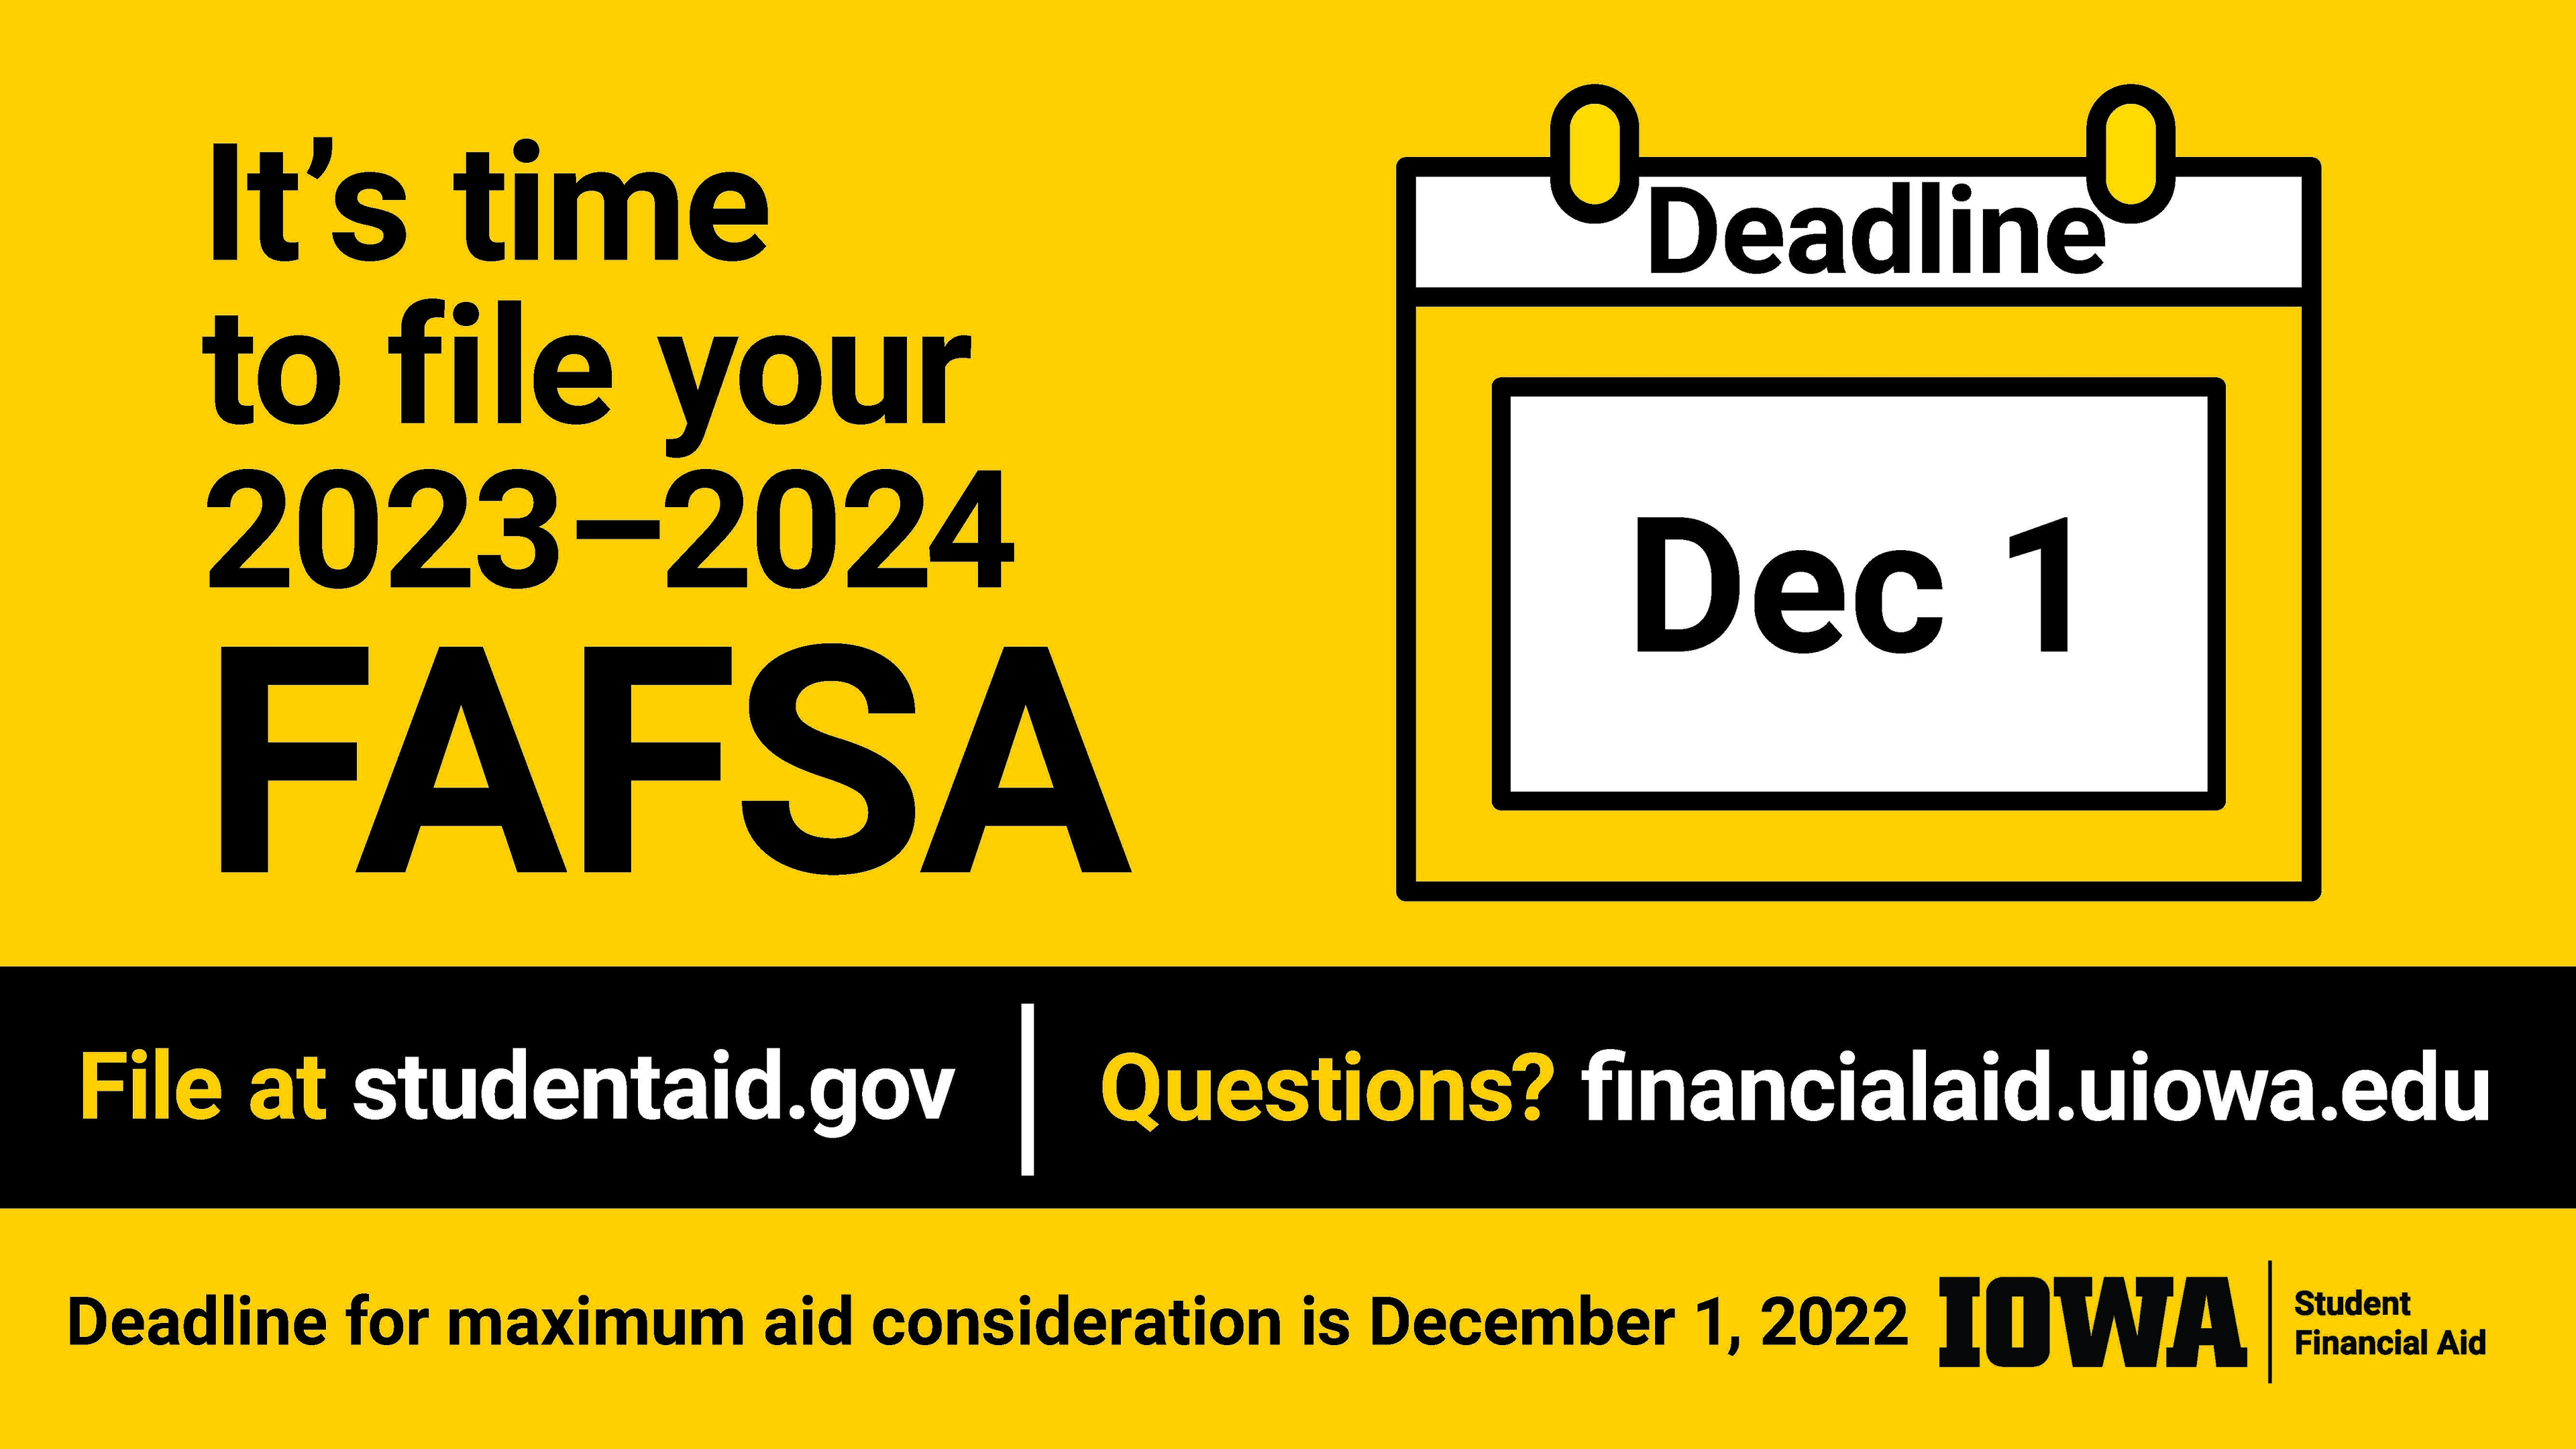 It's time to file your 2023-2024 FAFSA, Deadline Dec 1